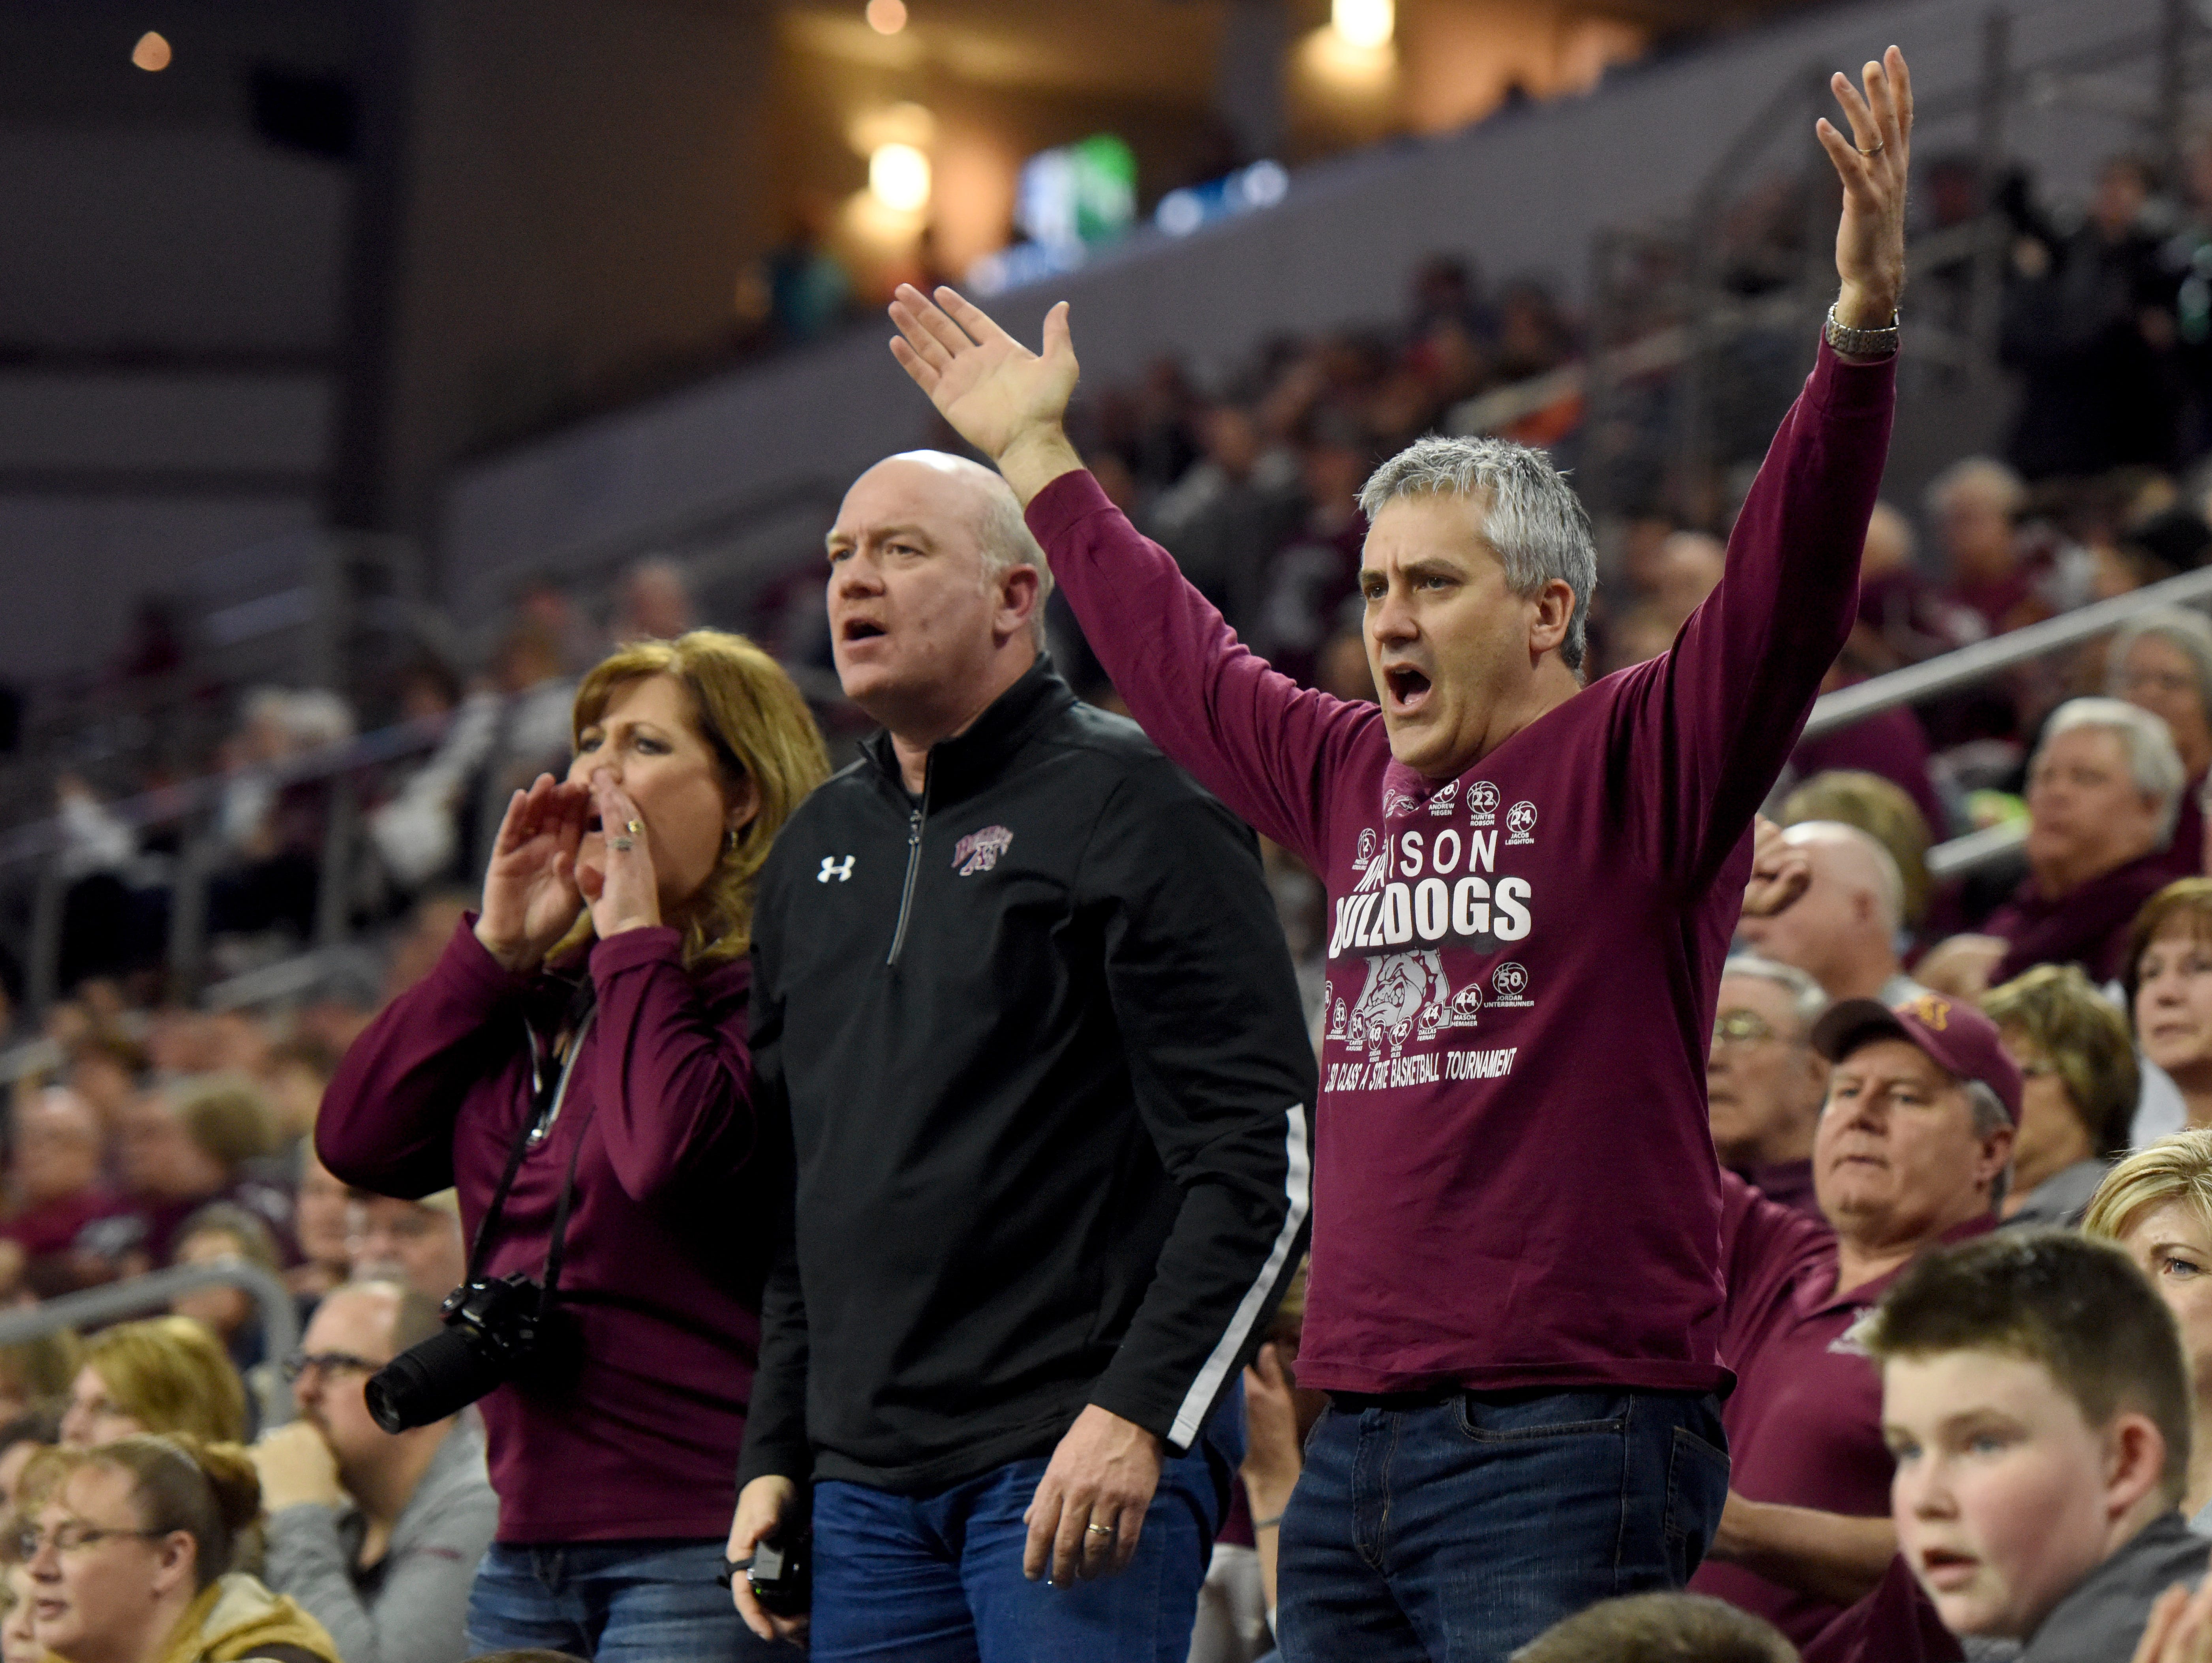 Madison fans react to a ref's call against Tea Area during the 2017 SDHSAA Class A boy's basketball championship at the Denny Sanford Premier Center on Saturday, March 18, 2017.